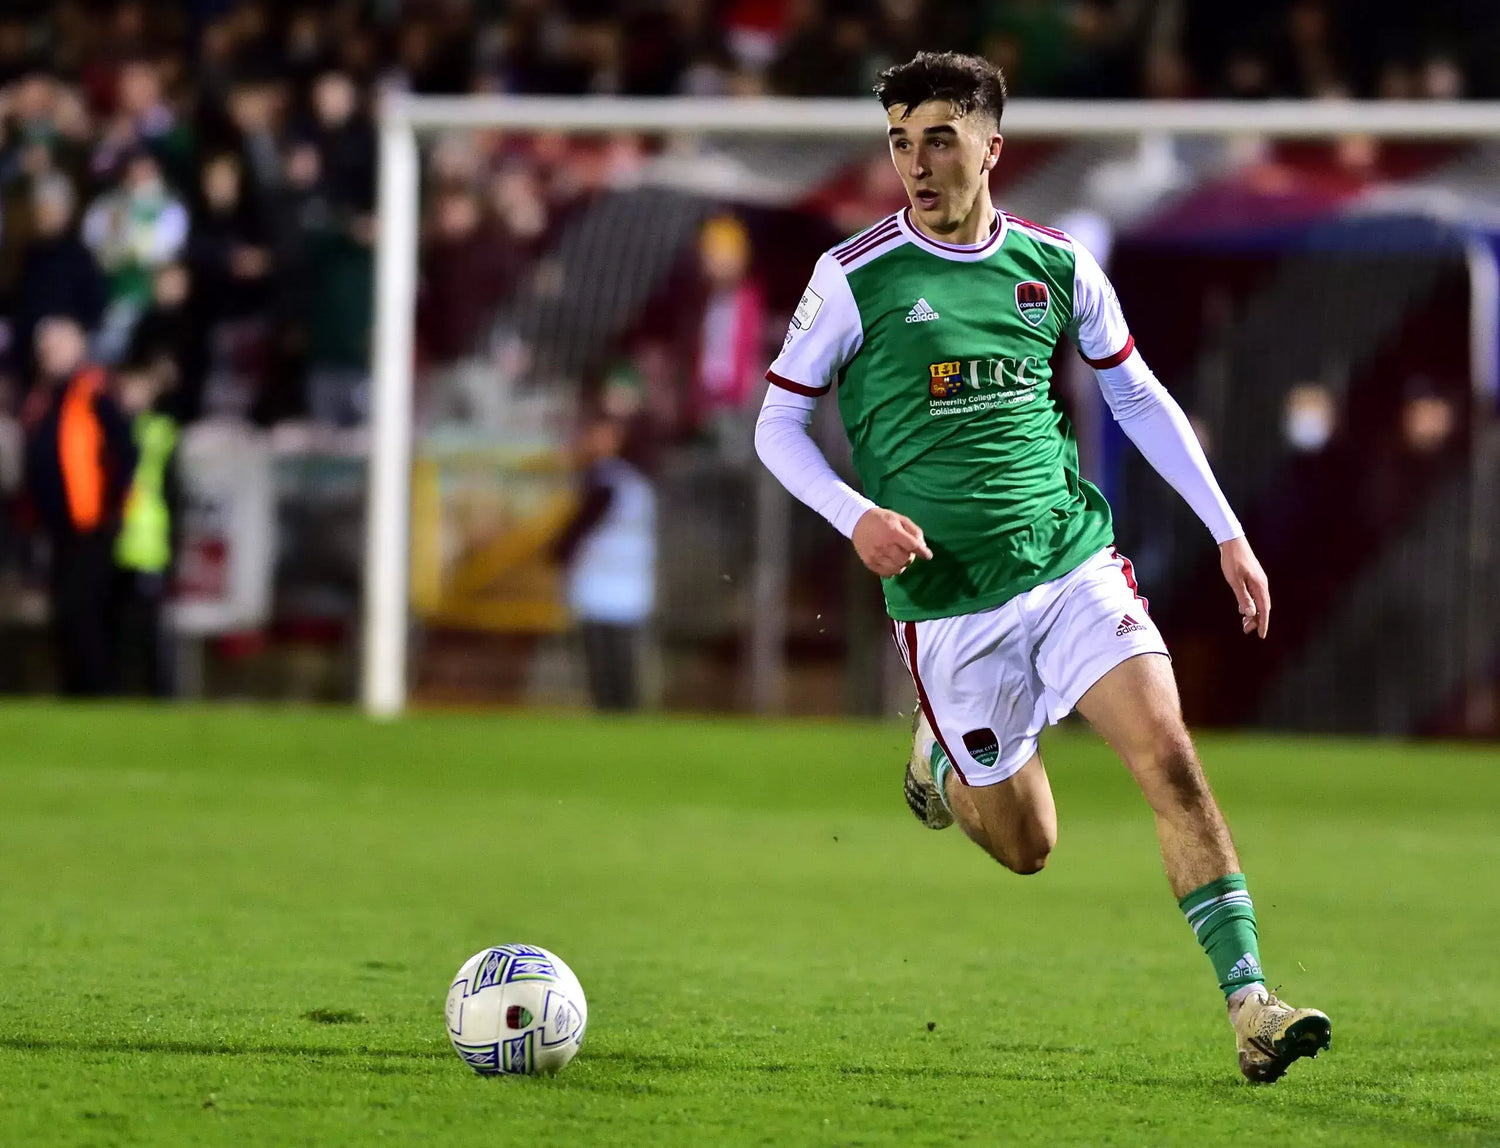 Preview: City vs Galway United